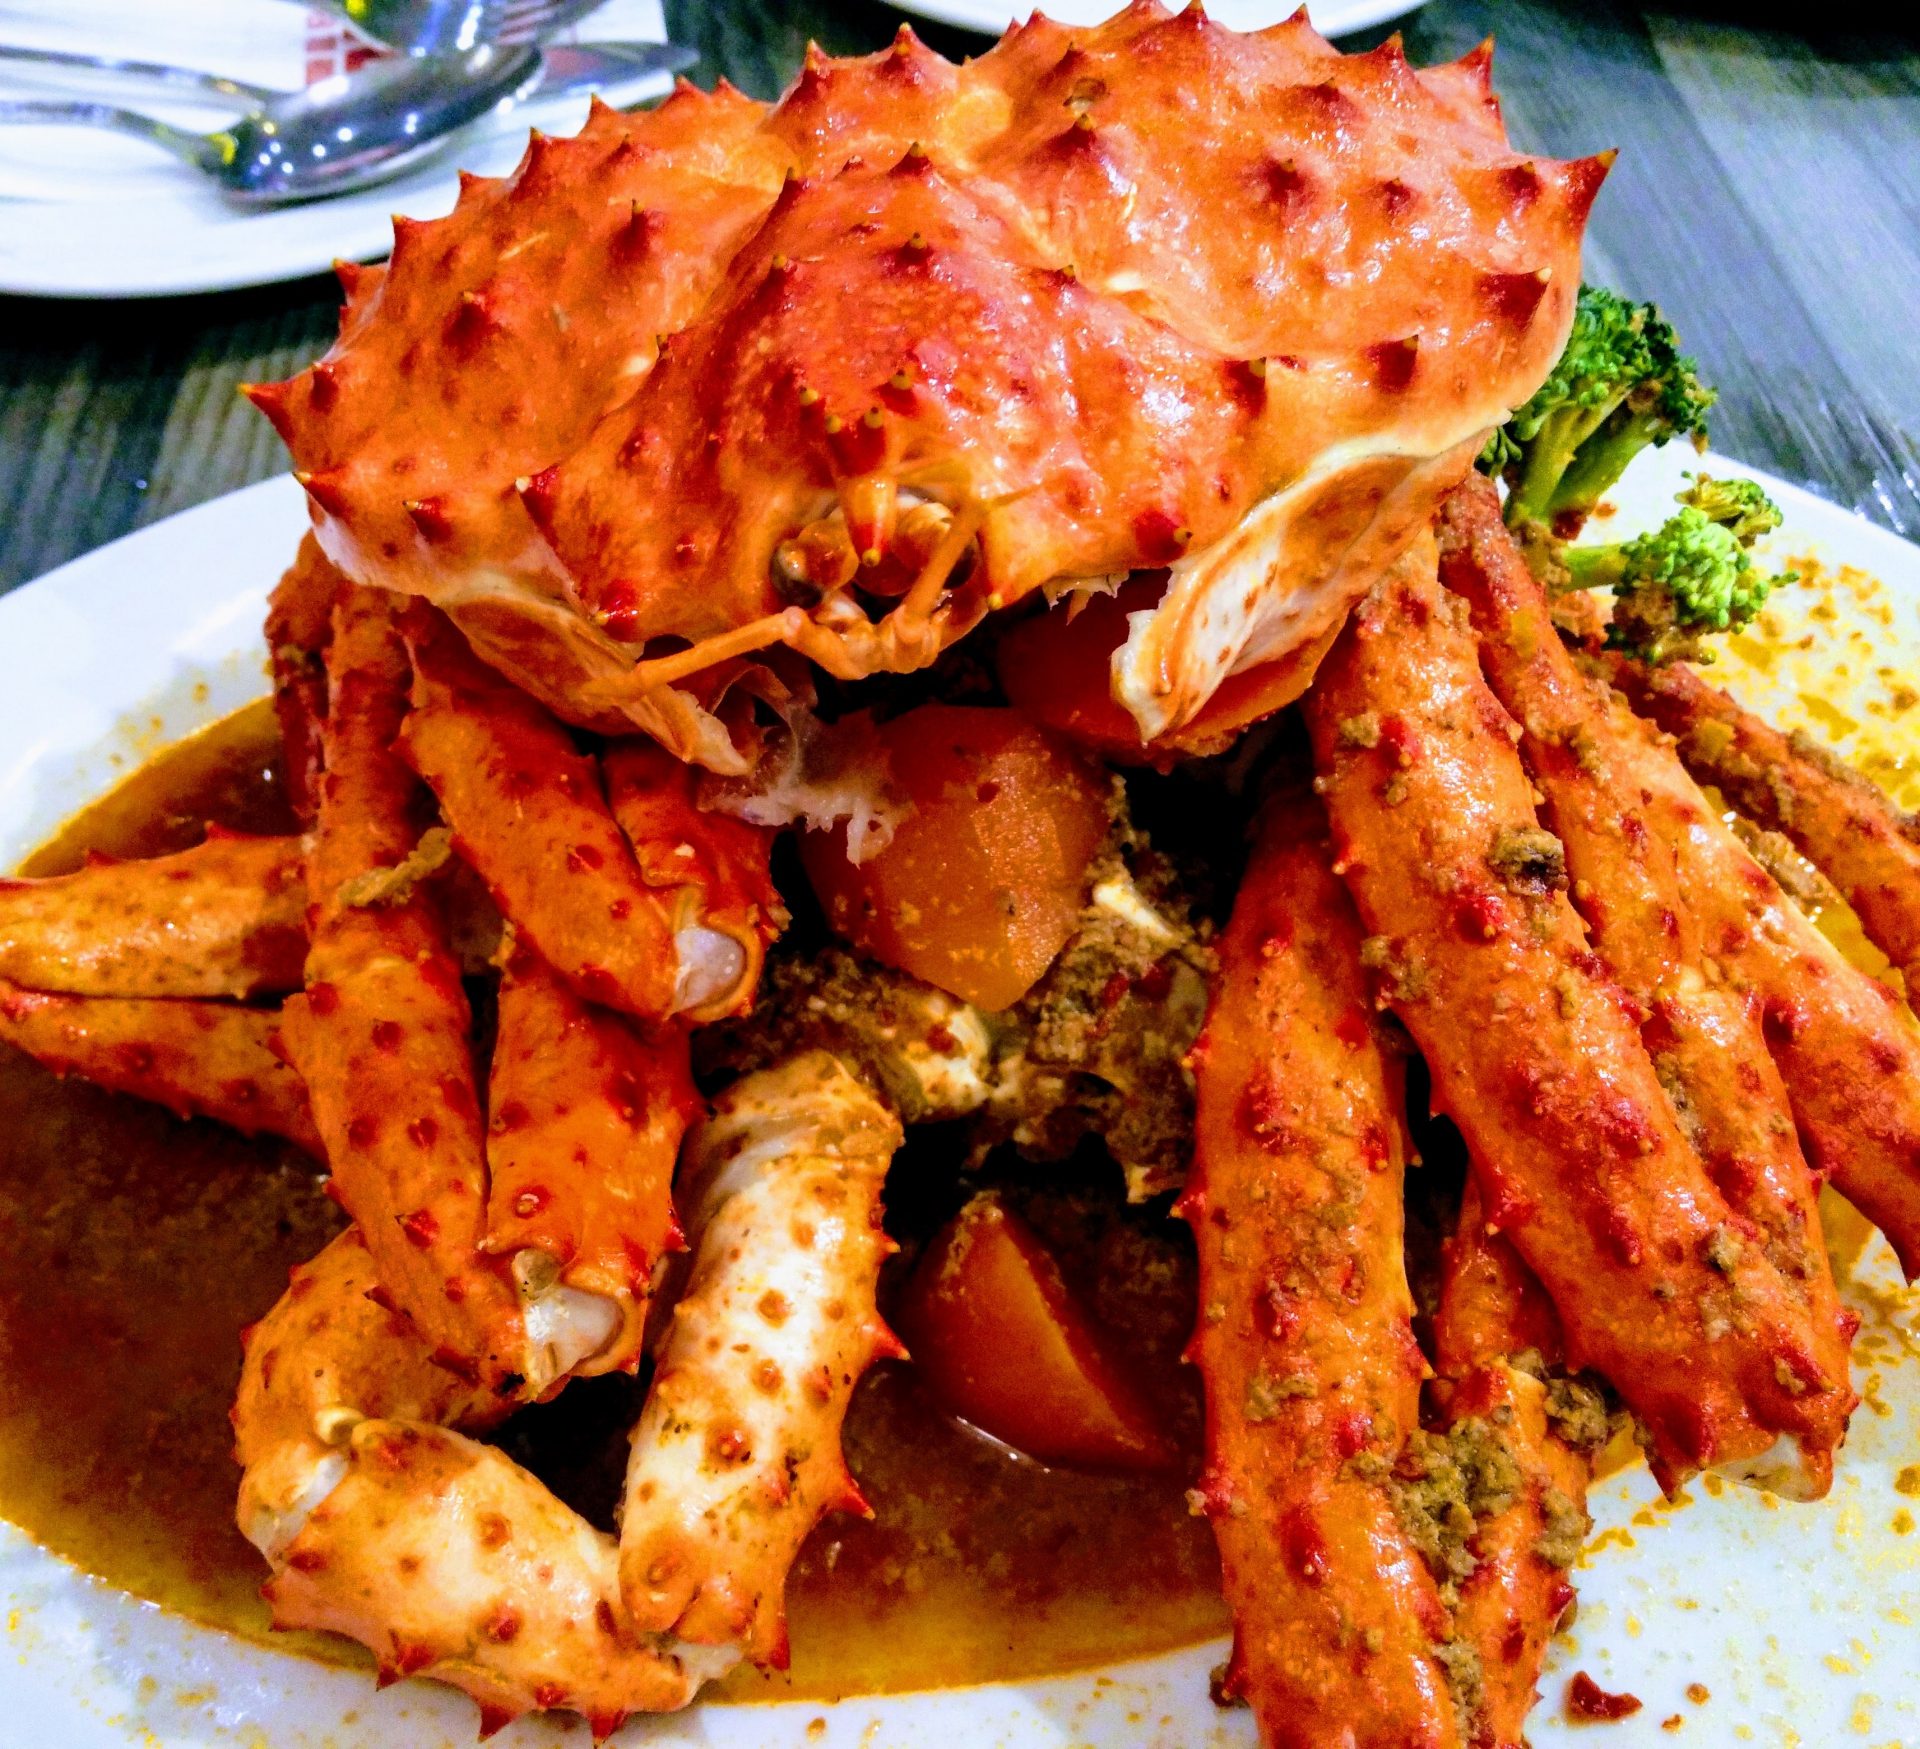 Should You Get King Crab or Snow Crab for Your Next Party?